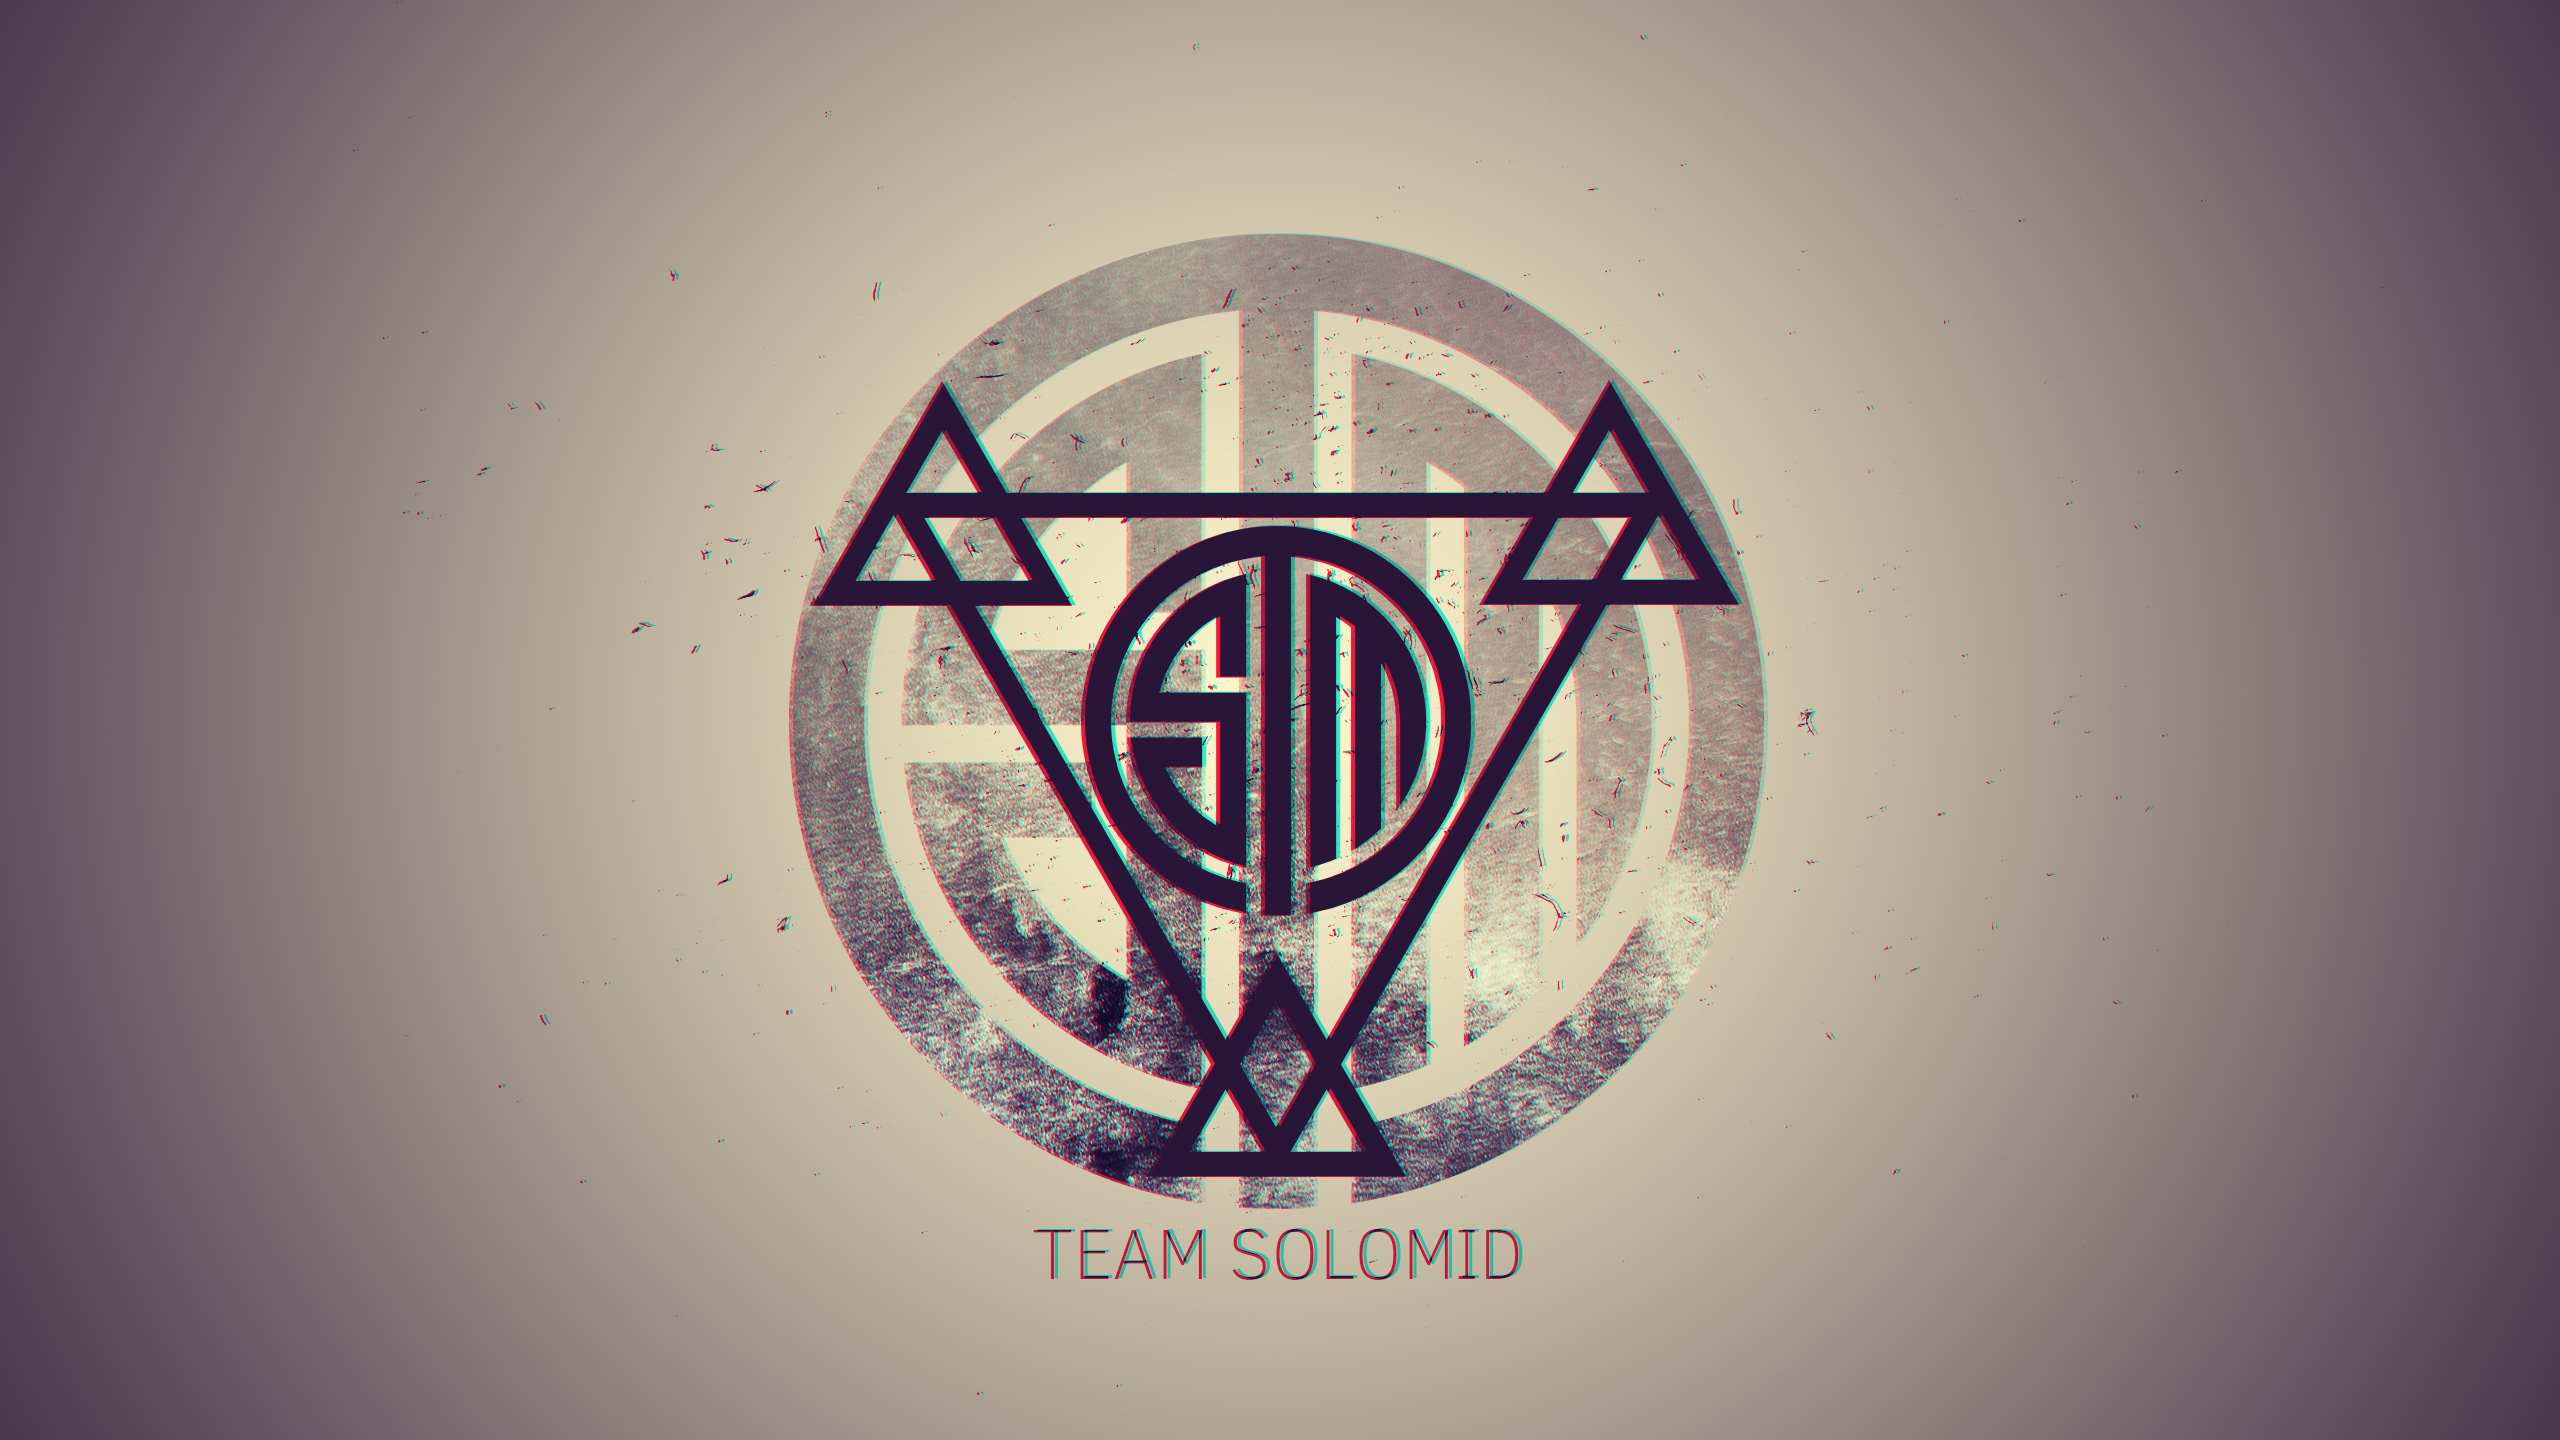 General 2560x1440 Team Solomid League of Legends E-Sports PC gaming logo gradient simple background